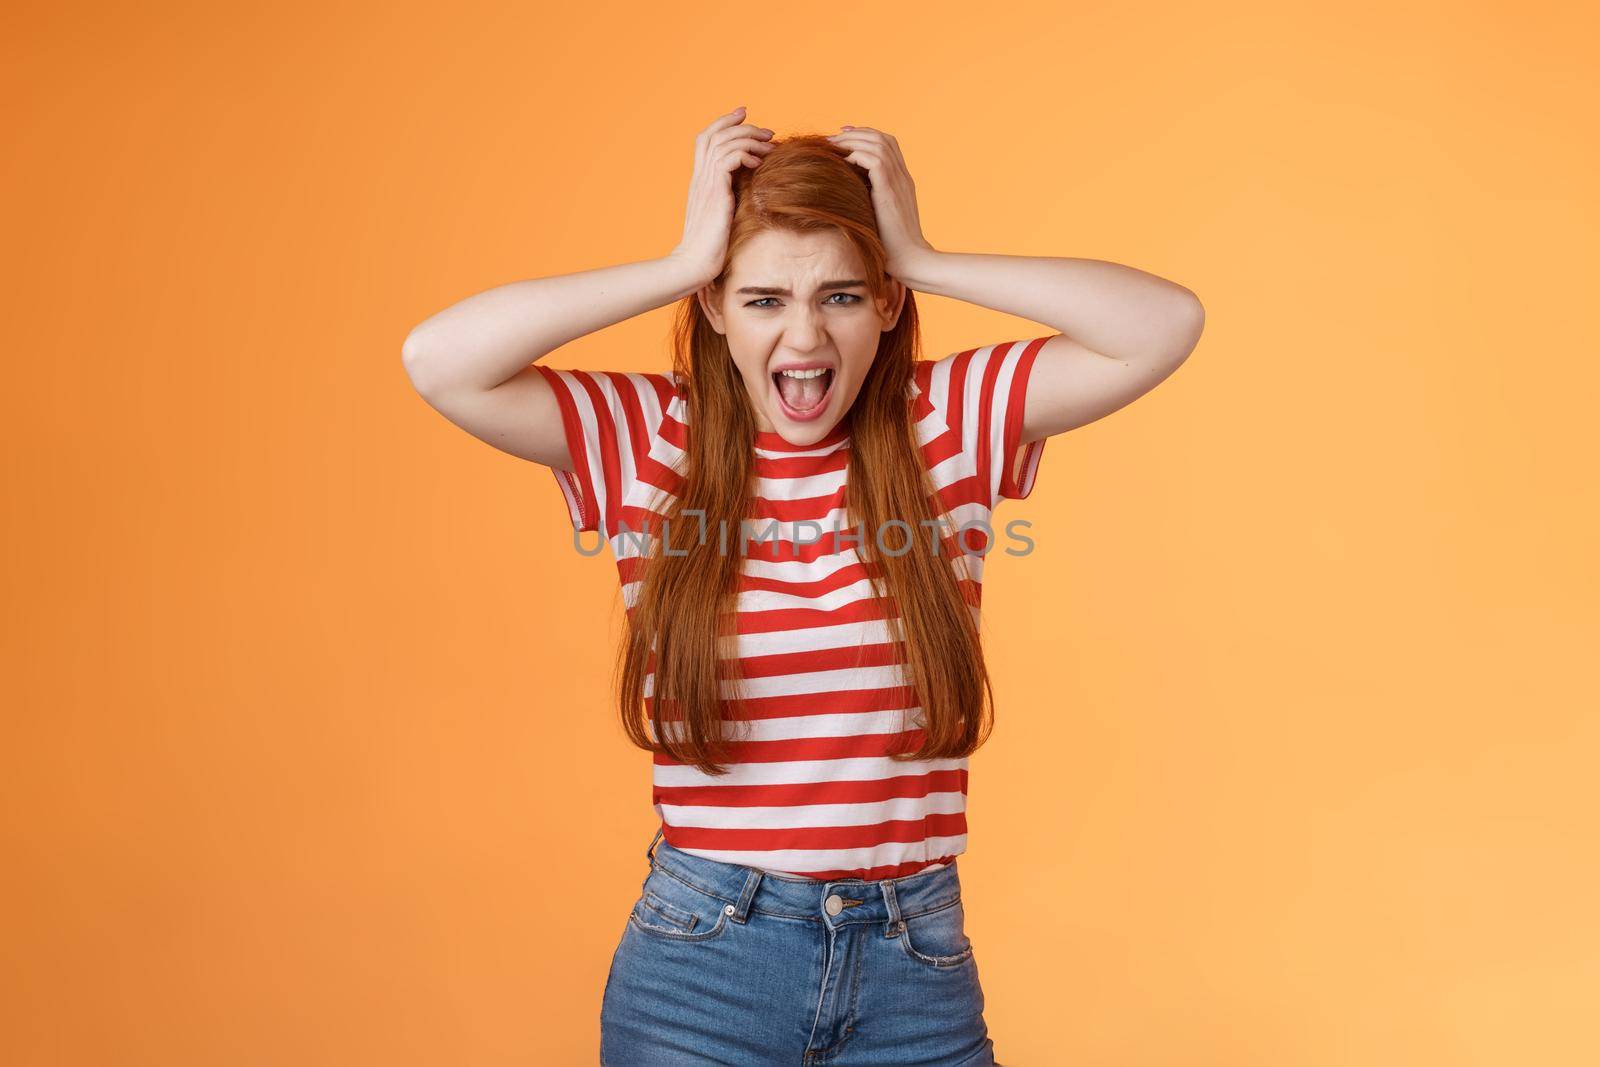 Uneasy depressed fed up pissed redhead girlfriend, scream upset, grab head, pull hair, yelling bothered, pressed, distressed, hate everyone, mental break-down, mind blowing, stand orange background by Benzoix